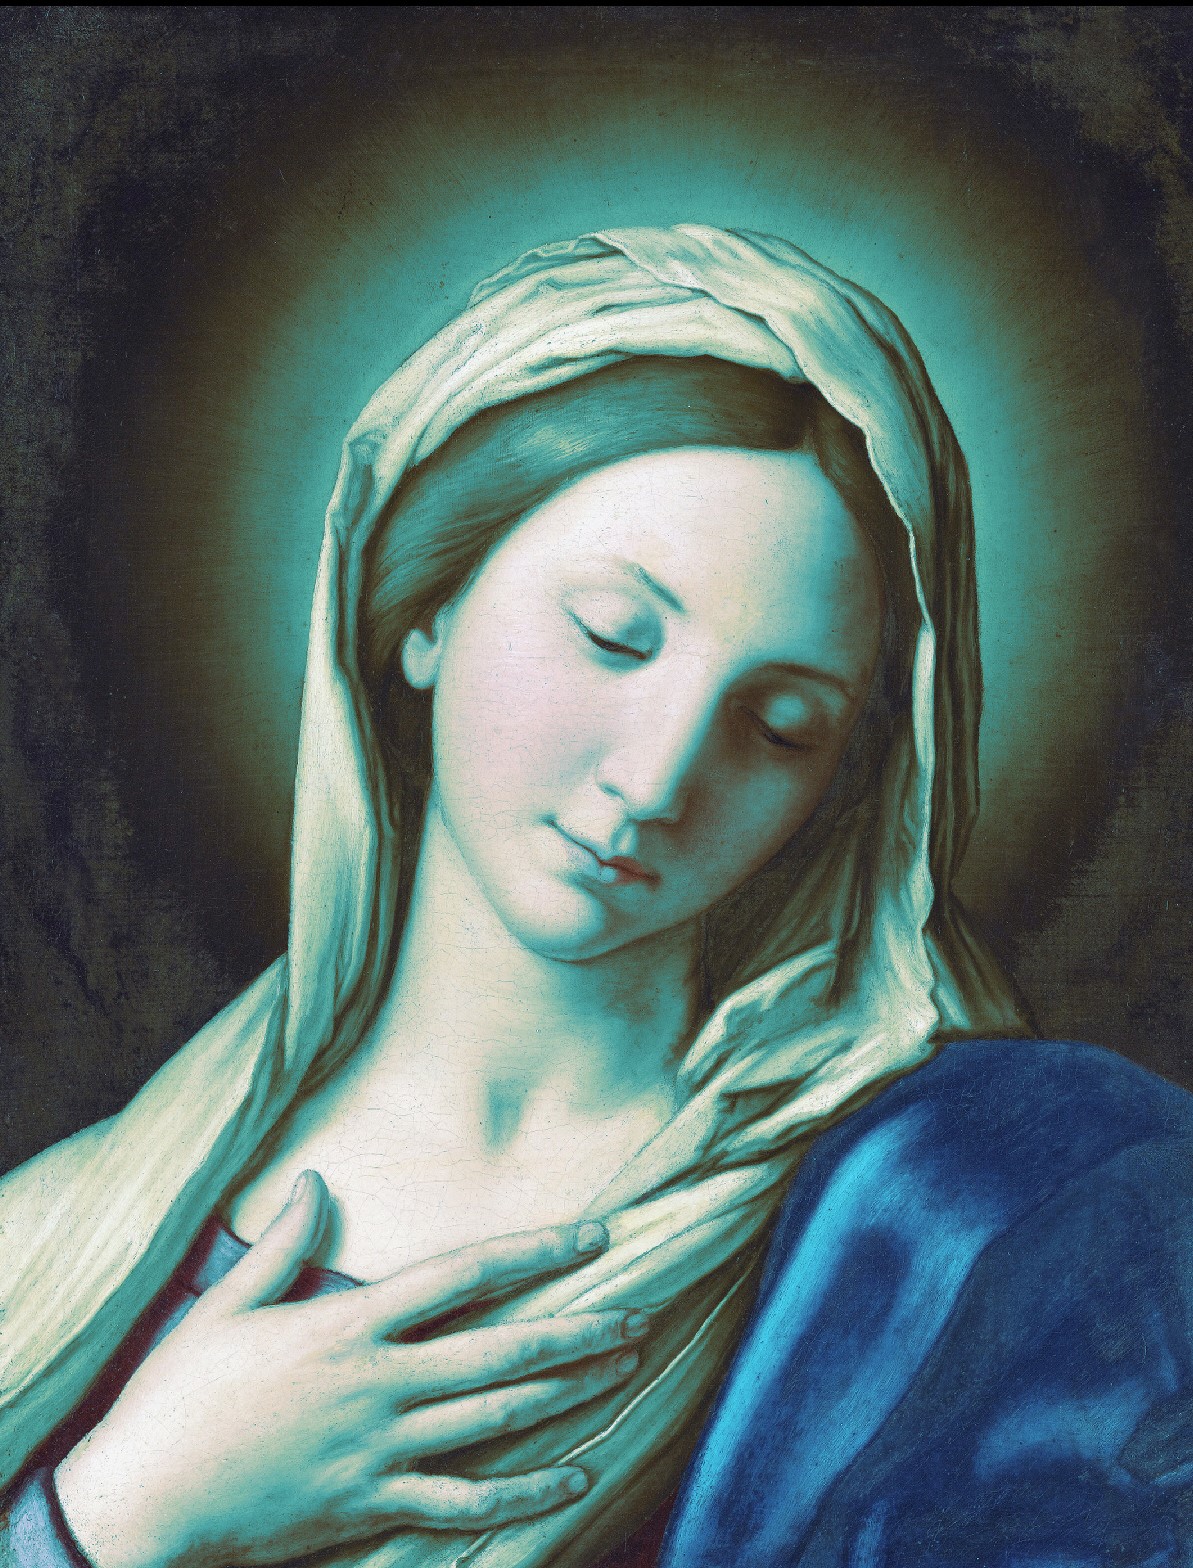 Editorial: New Image of Mary?